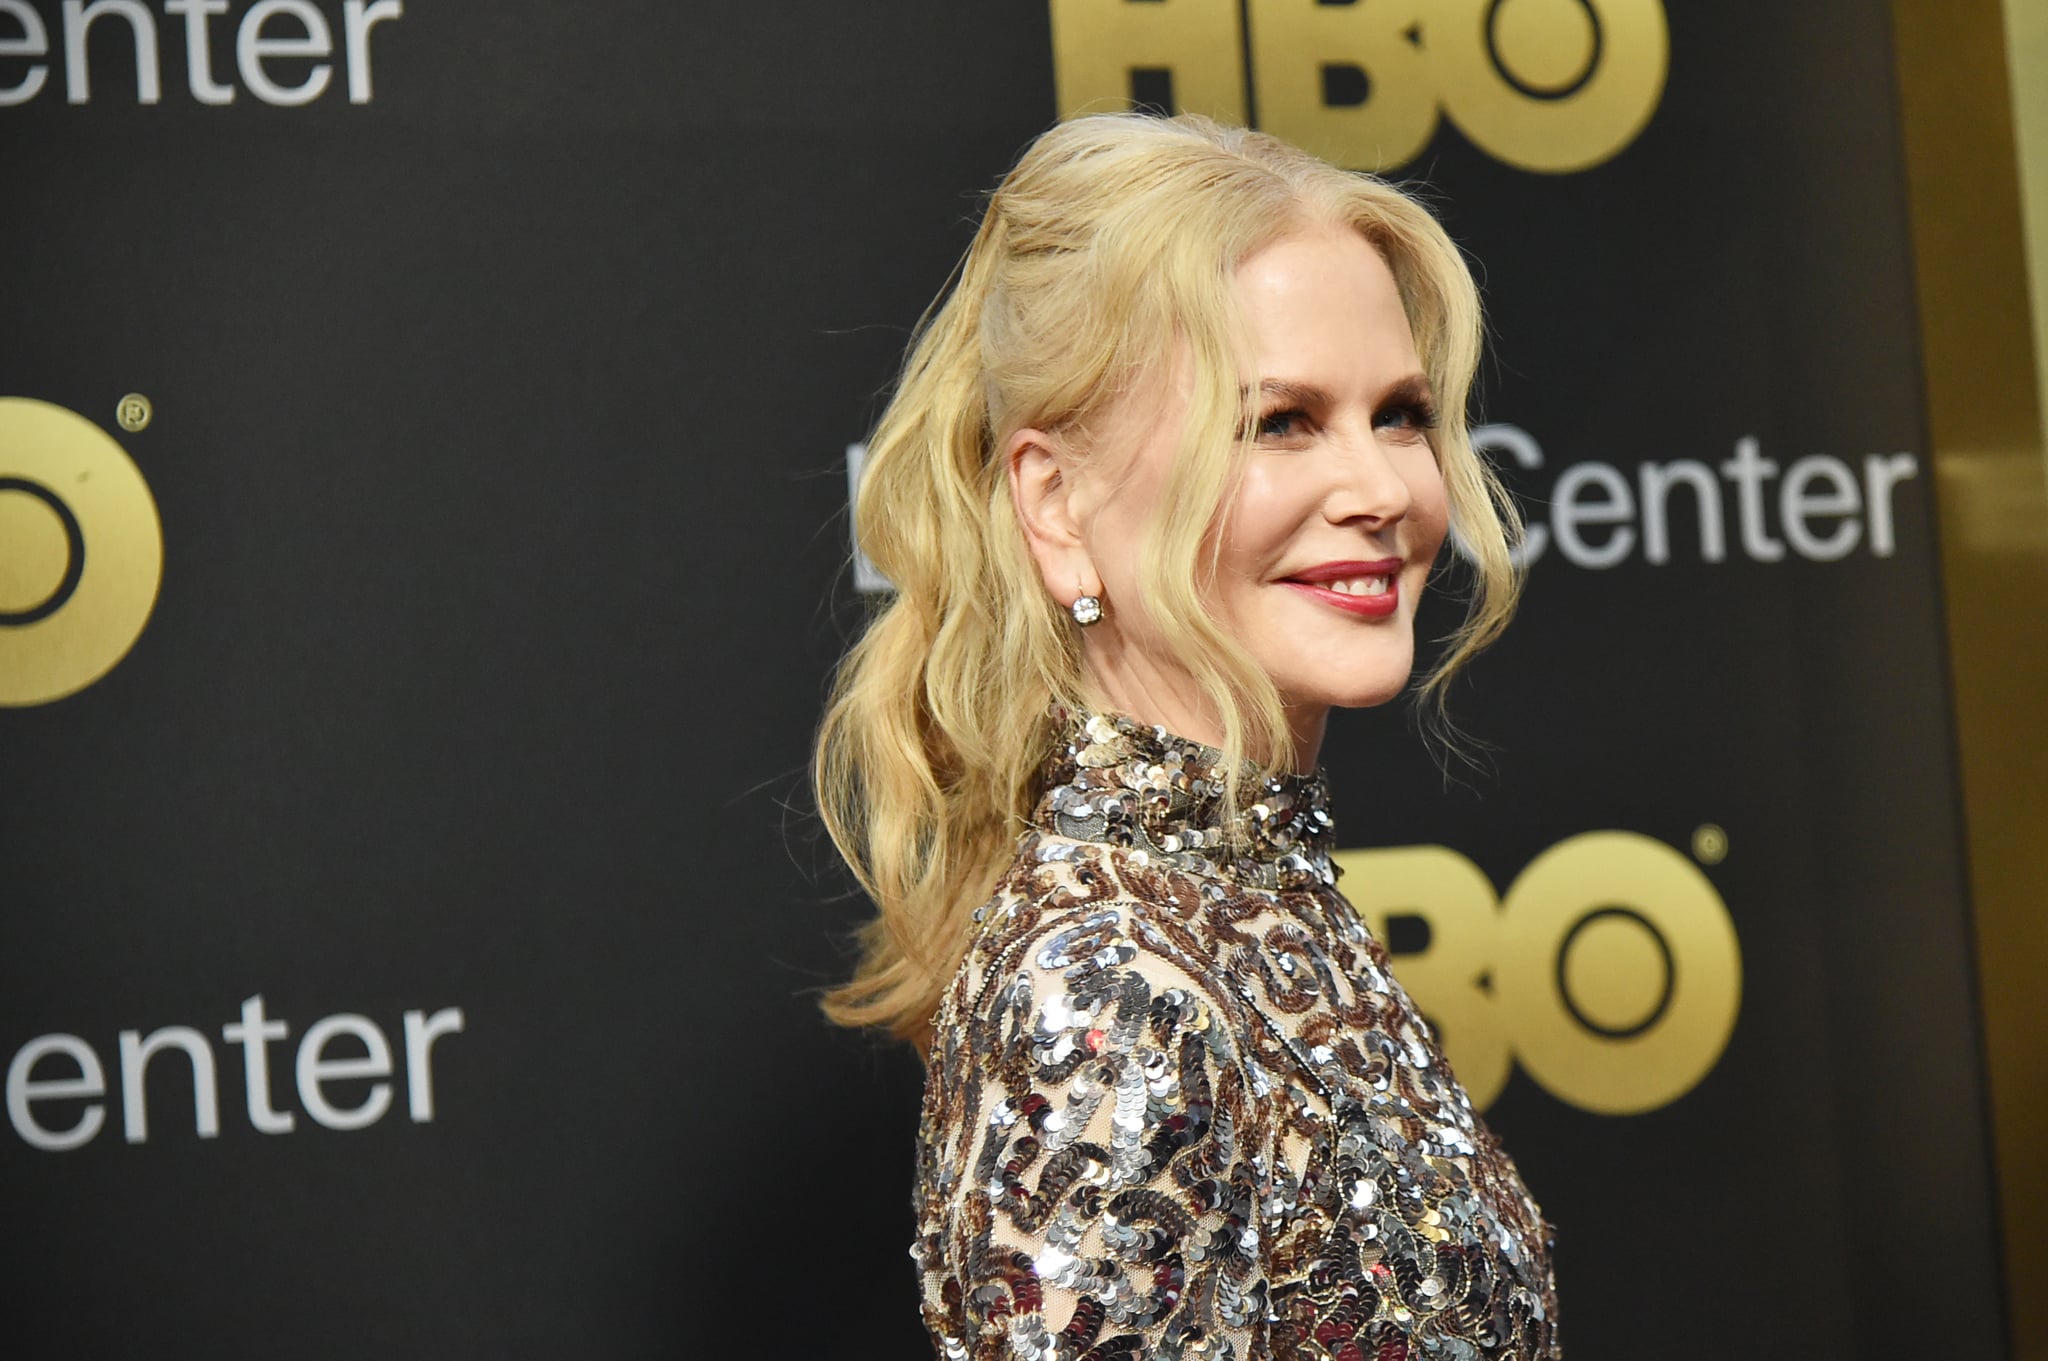 NEW YORK, NY - MAY 29:  Actress Nicole Kidman attends Lincoln Center's American Songbook Gala at Alice Tully Hall on May 29, 2018 in New York City.  (Photo by Mike Coppola/Getty Images for Lincoln Center)